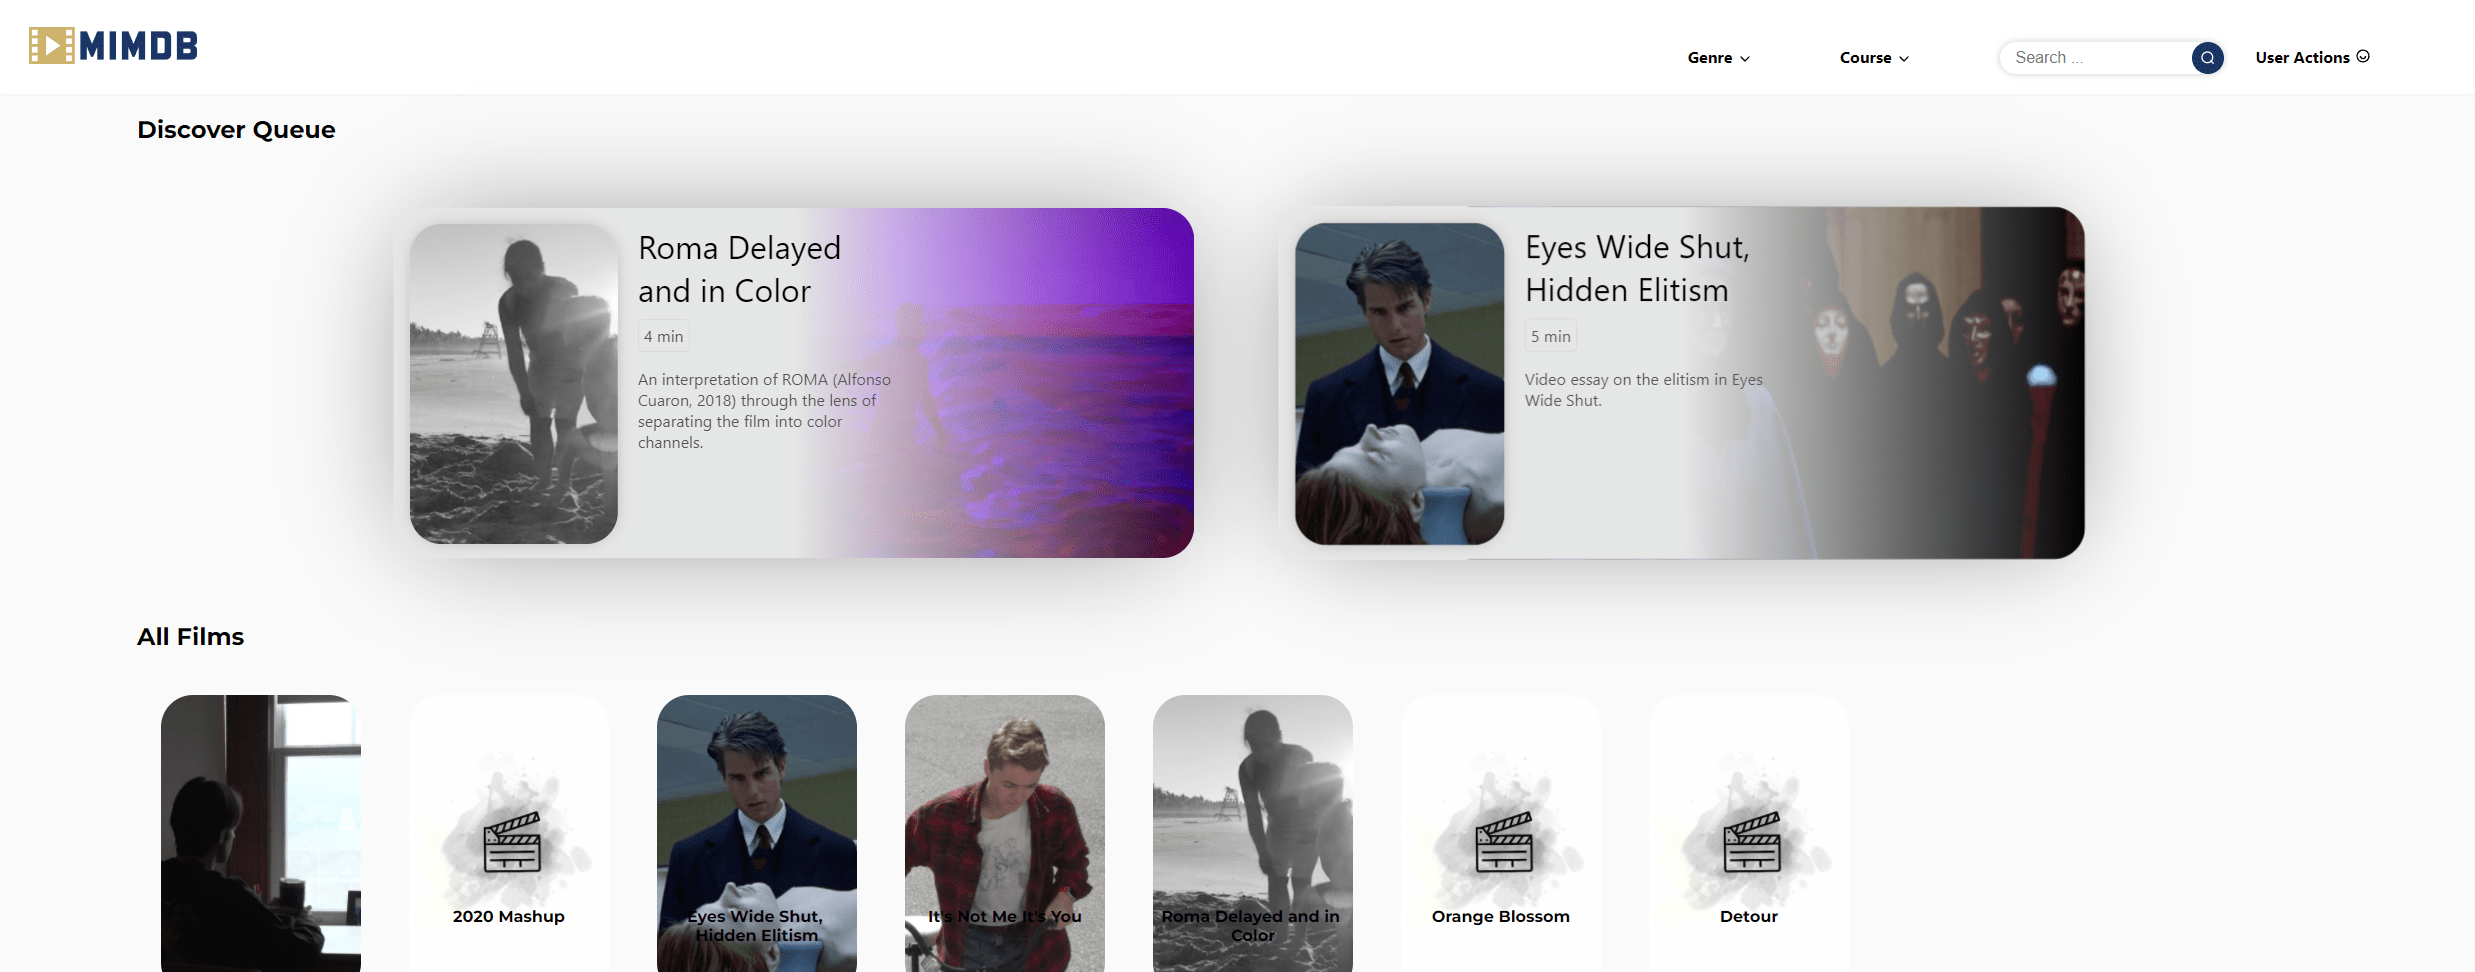 The homepage of the movie database